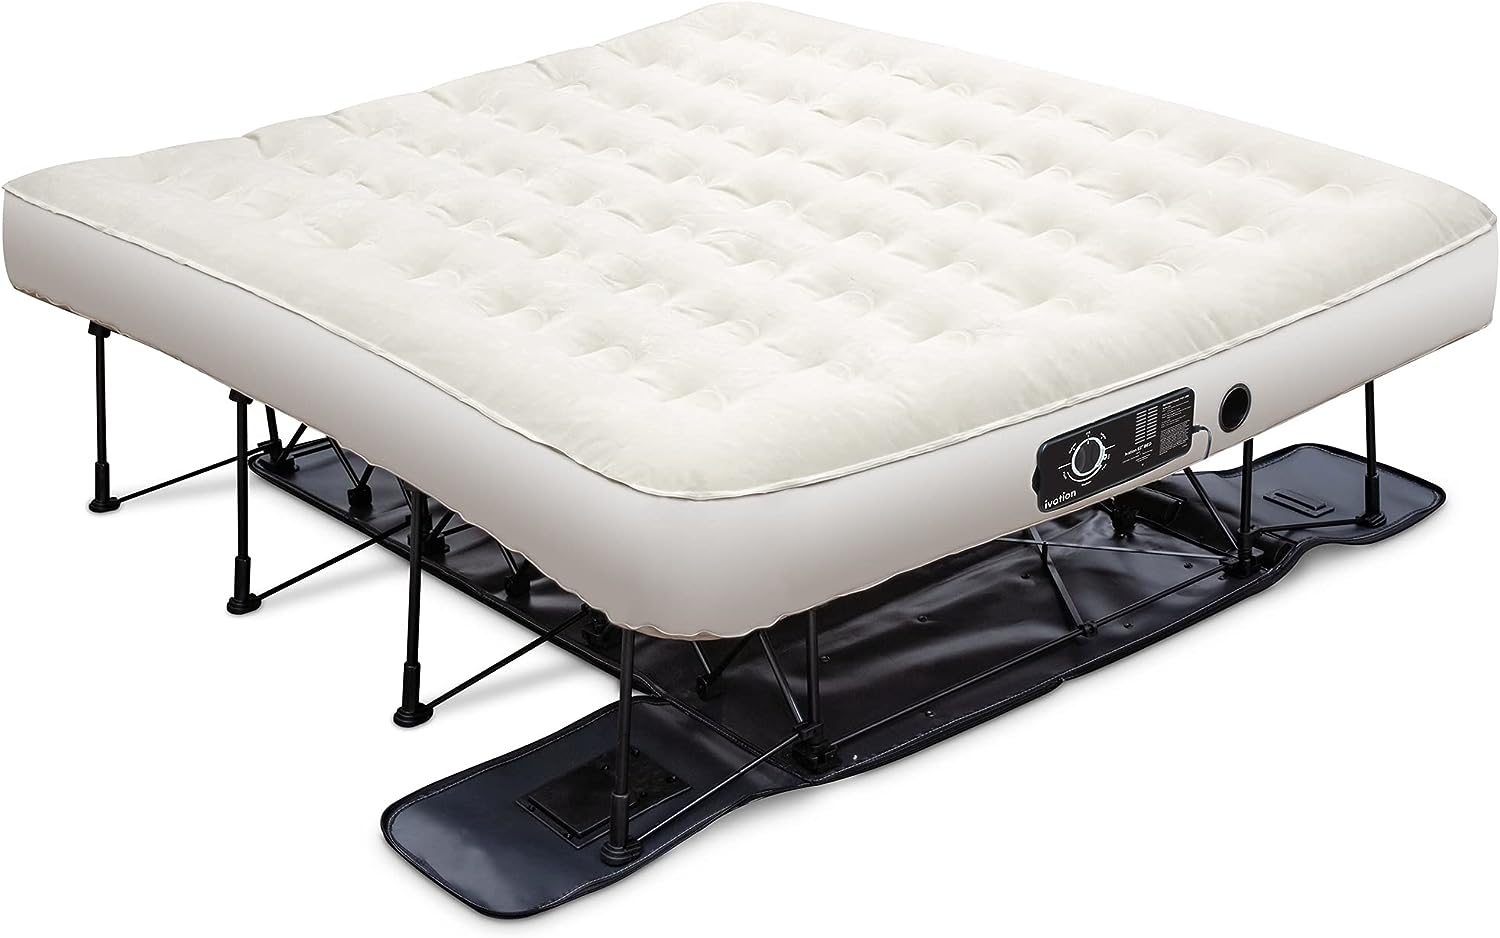 Ez-Bed (Twin) Air Mattress with Deflate Defender™ Technology Dual Auto Comfort Pump and Dual Layer Laminate Material - Airbed Frame & Rolling Case for Guest, Travel, Vacation, Camping